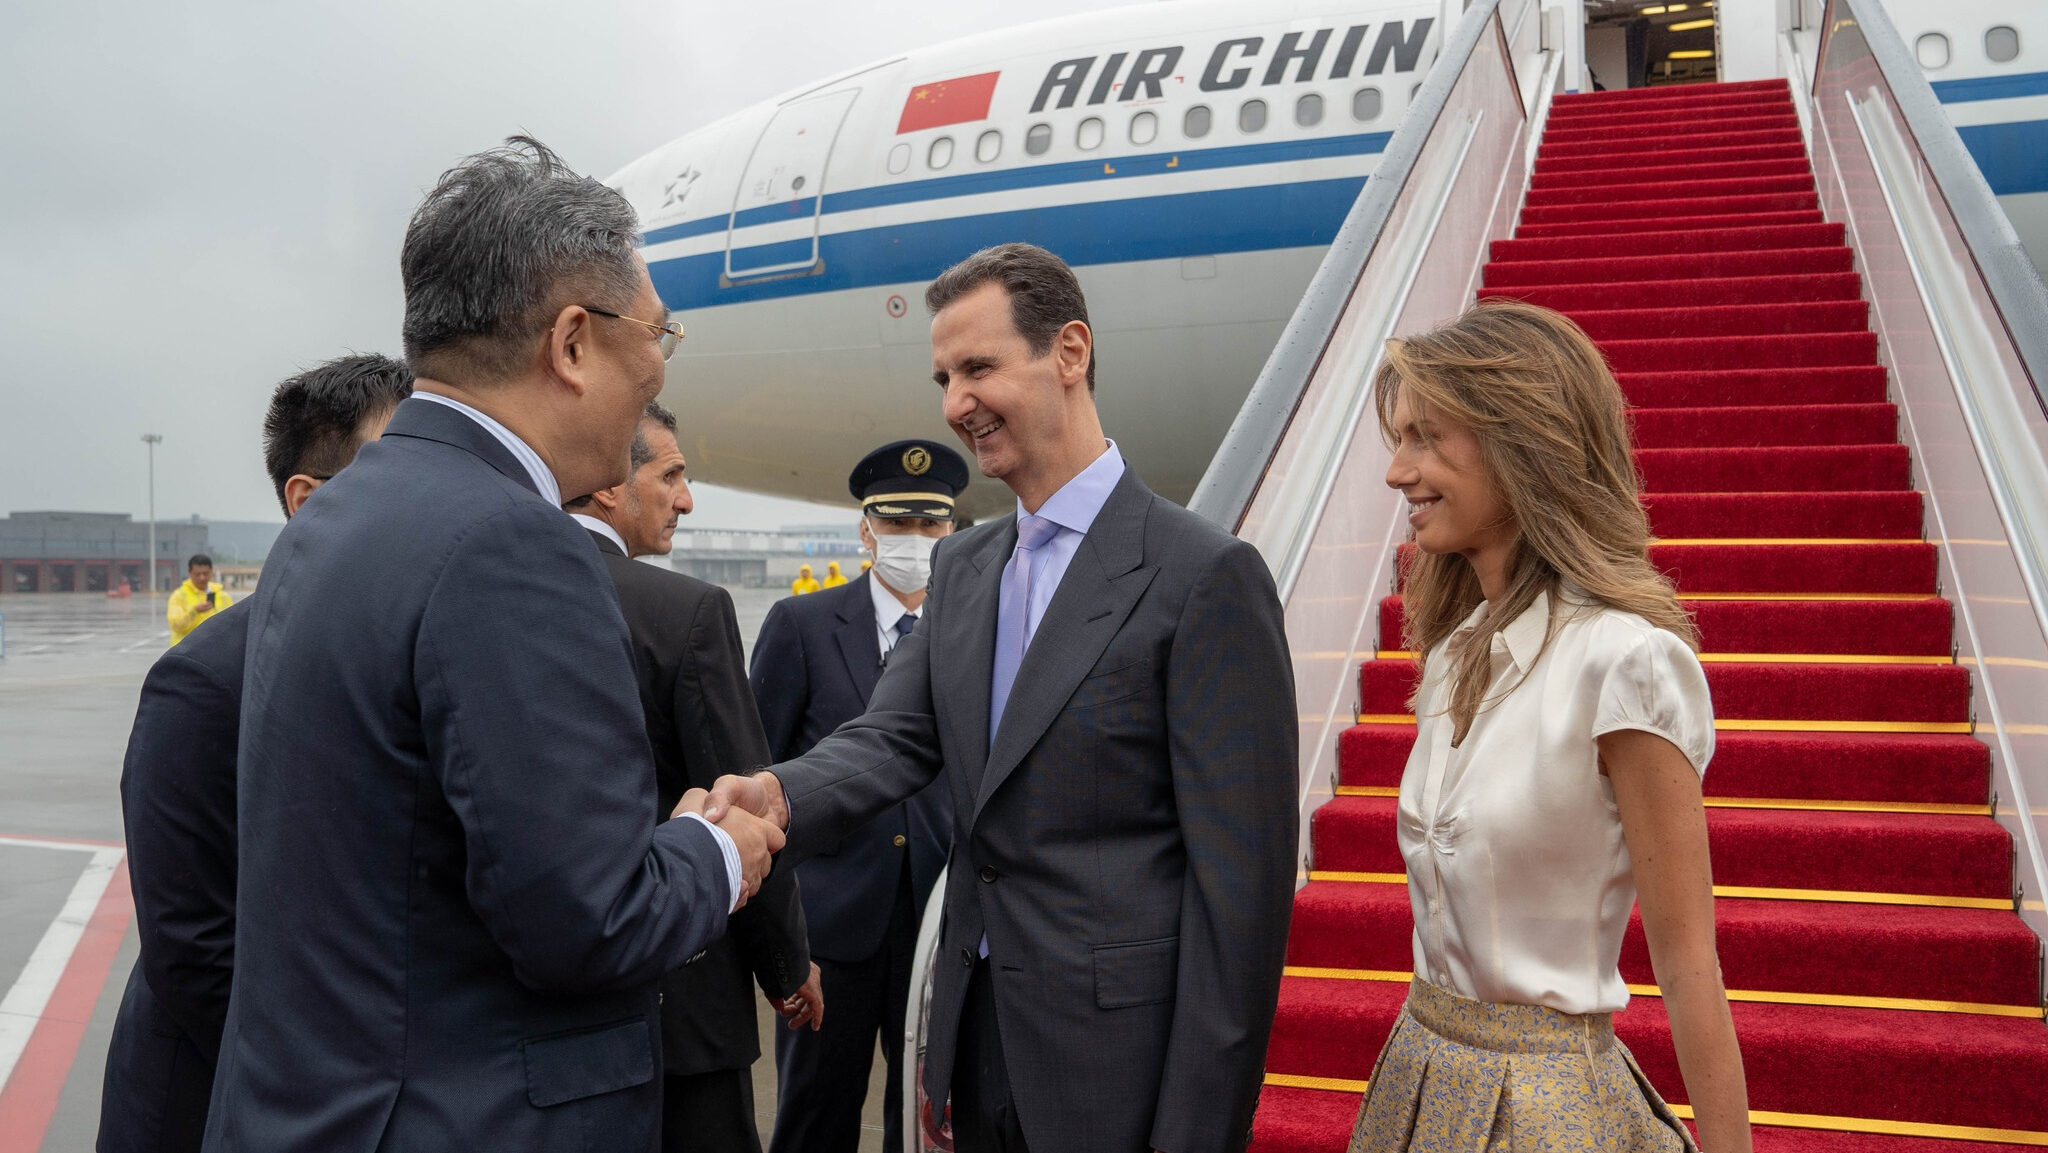 President Assad Arrives In China On First Visit Since Start of War in Syria